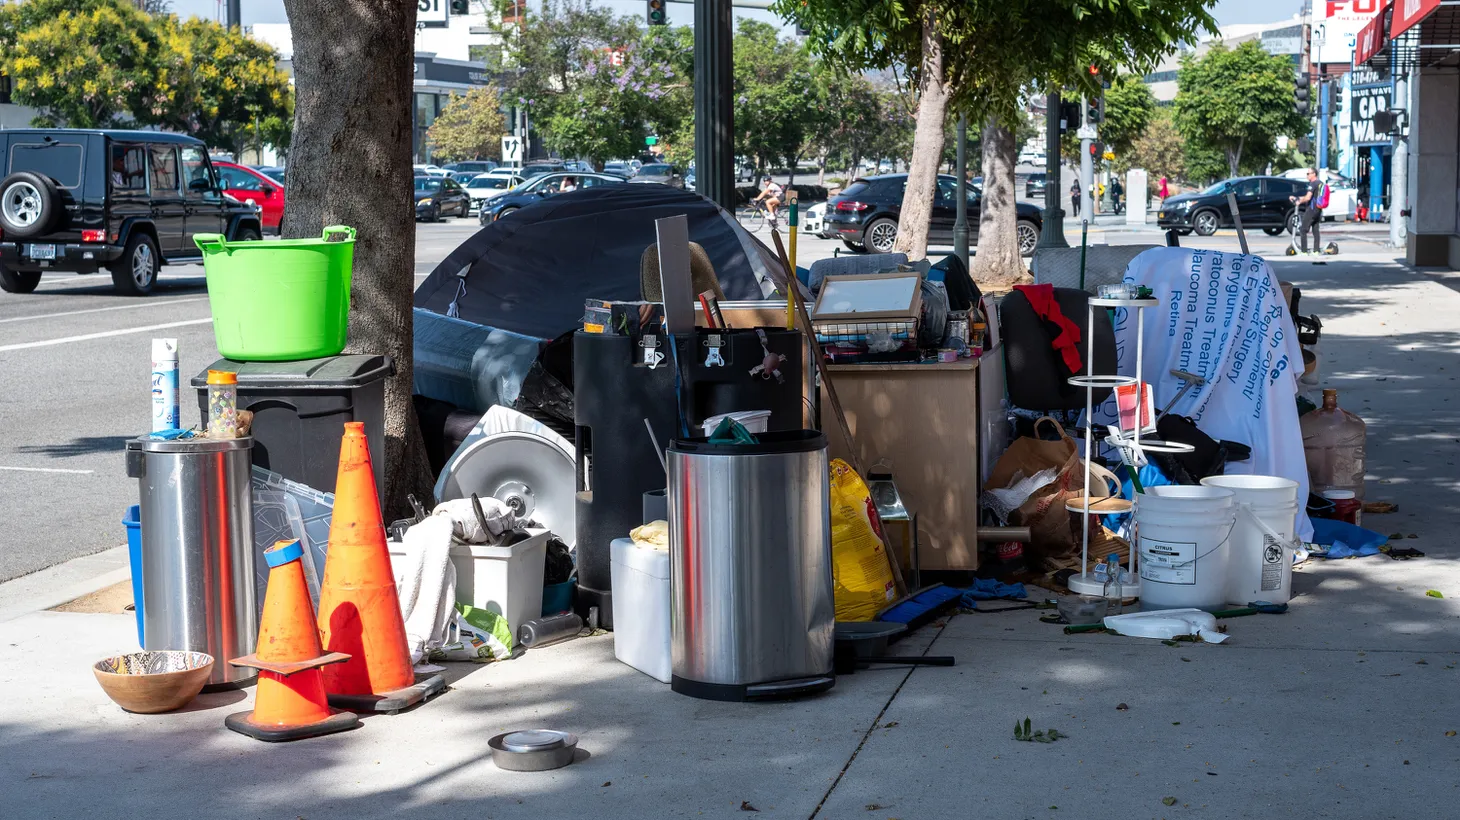 A homeless encampment is seen in Westwood, California.